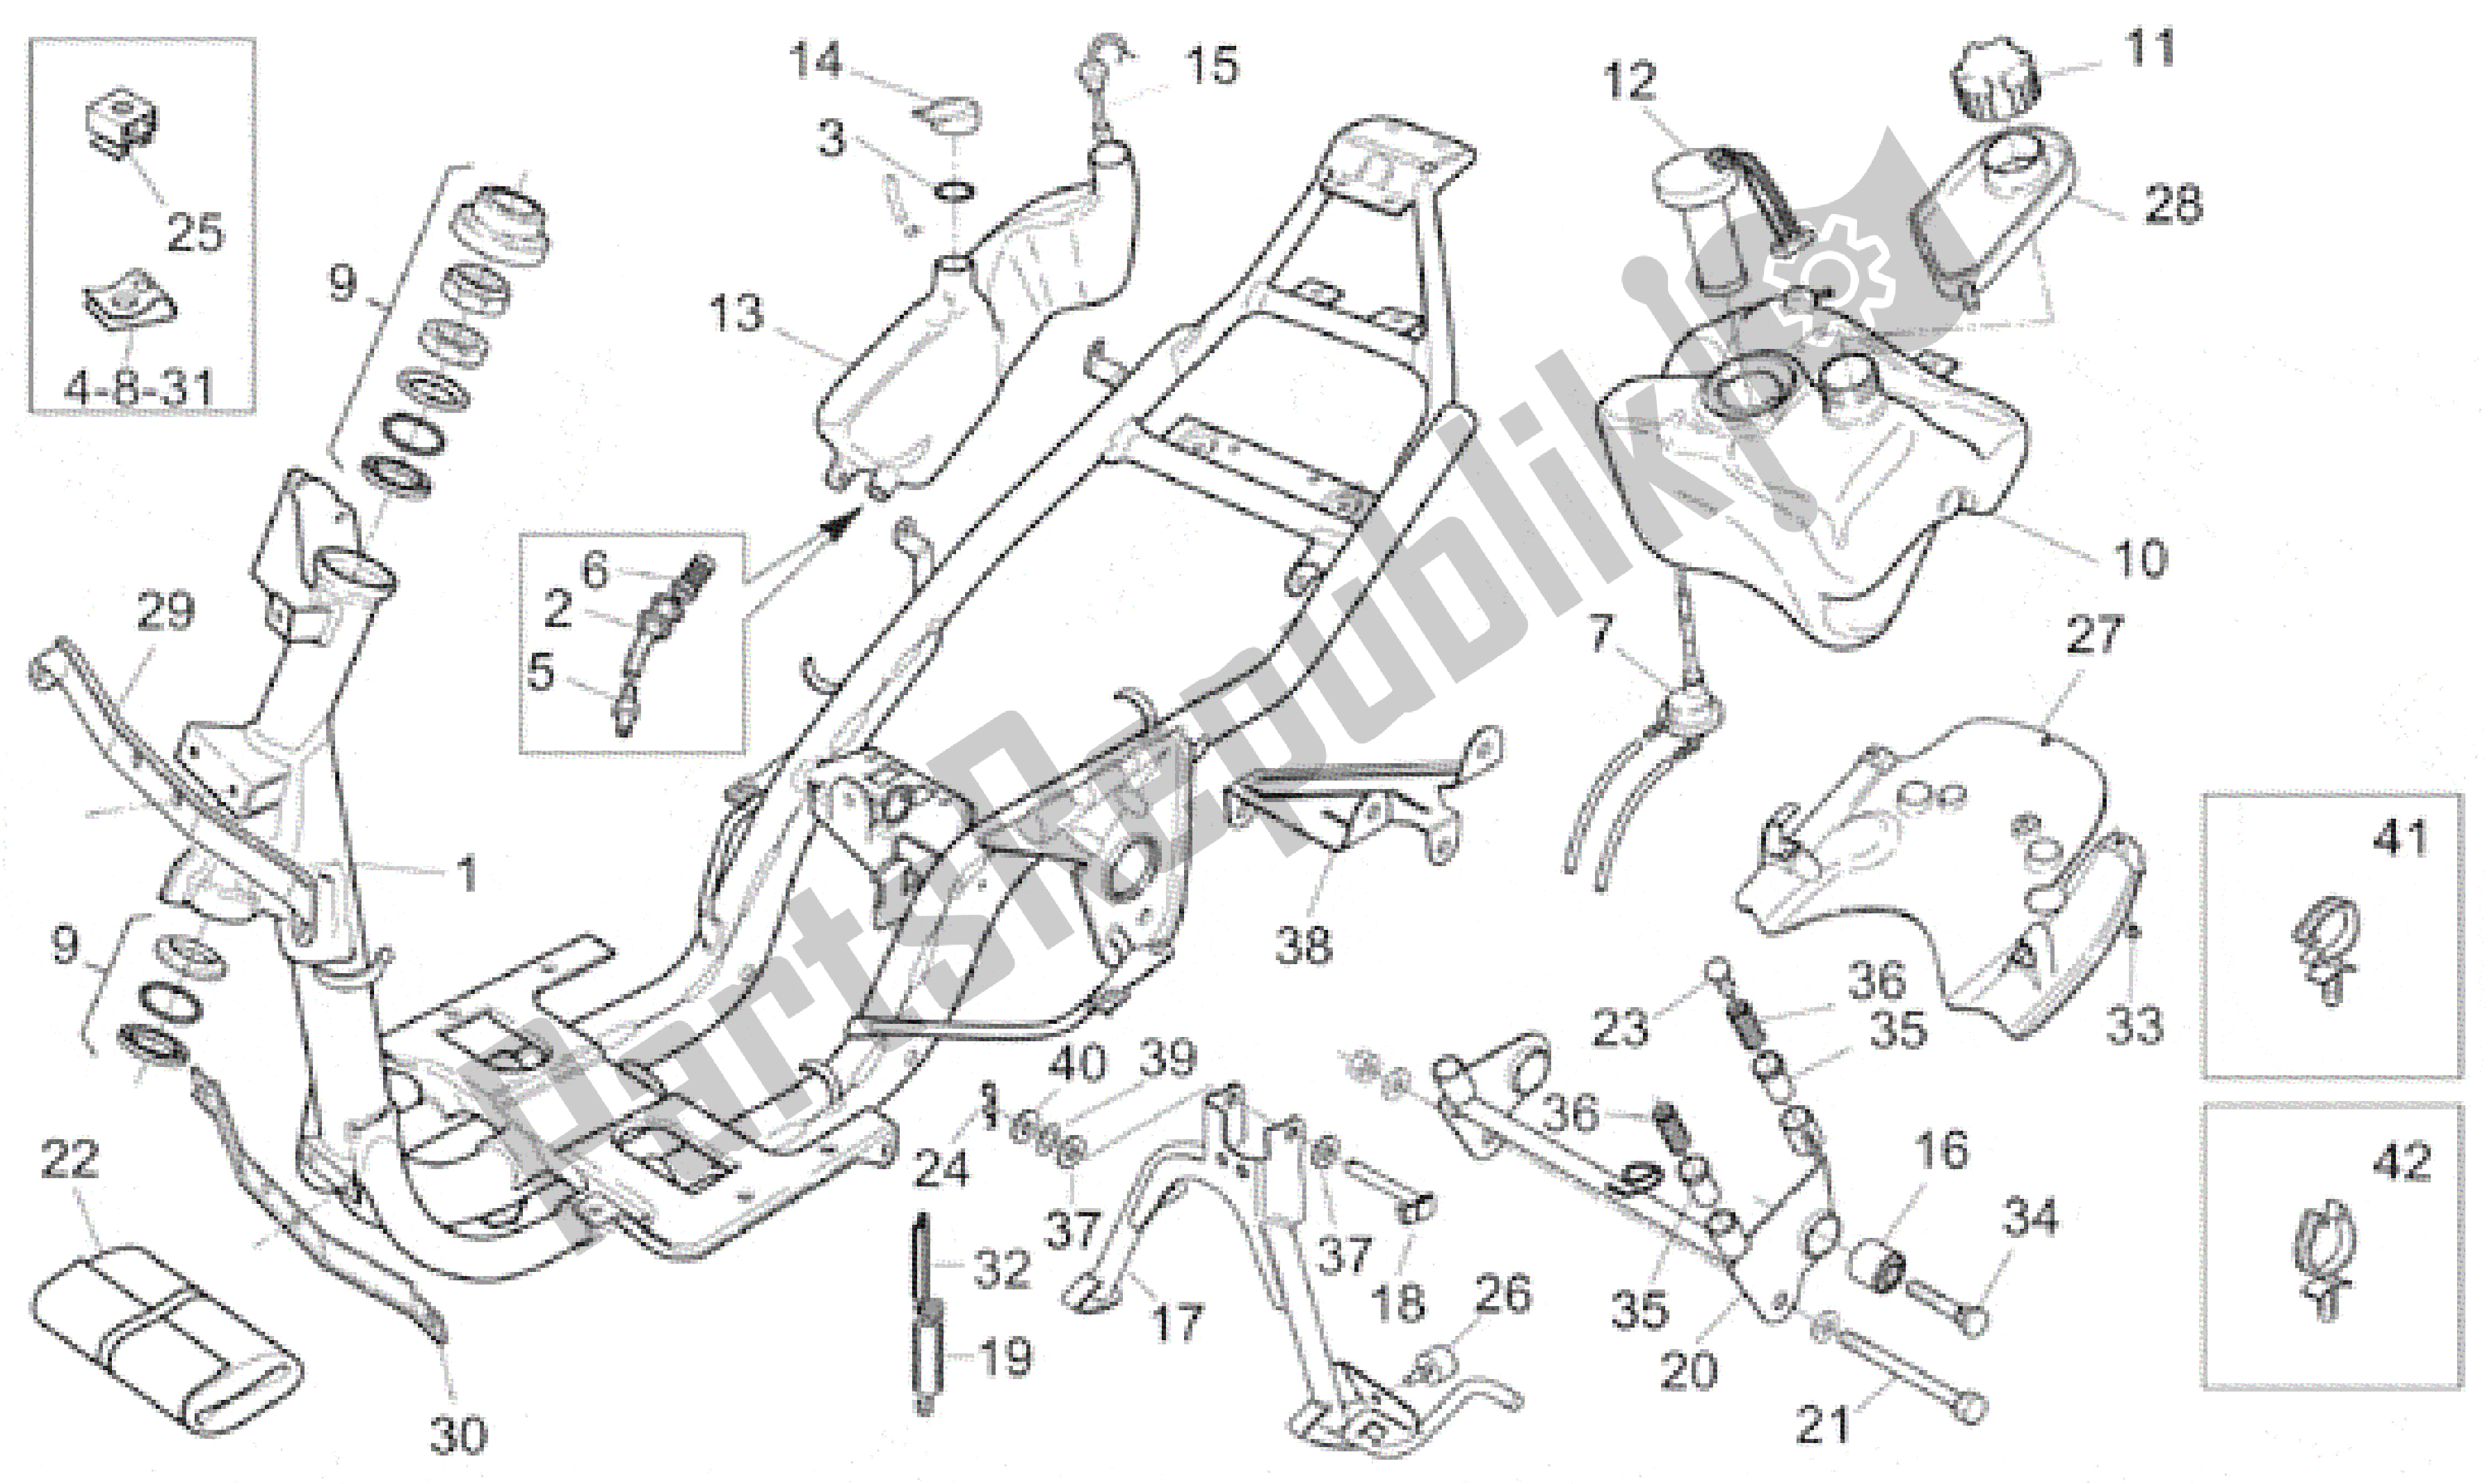 All parts for the Frame of the Aprilia Rally 50 1995 - 2003